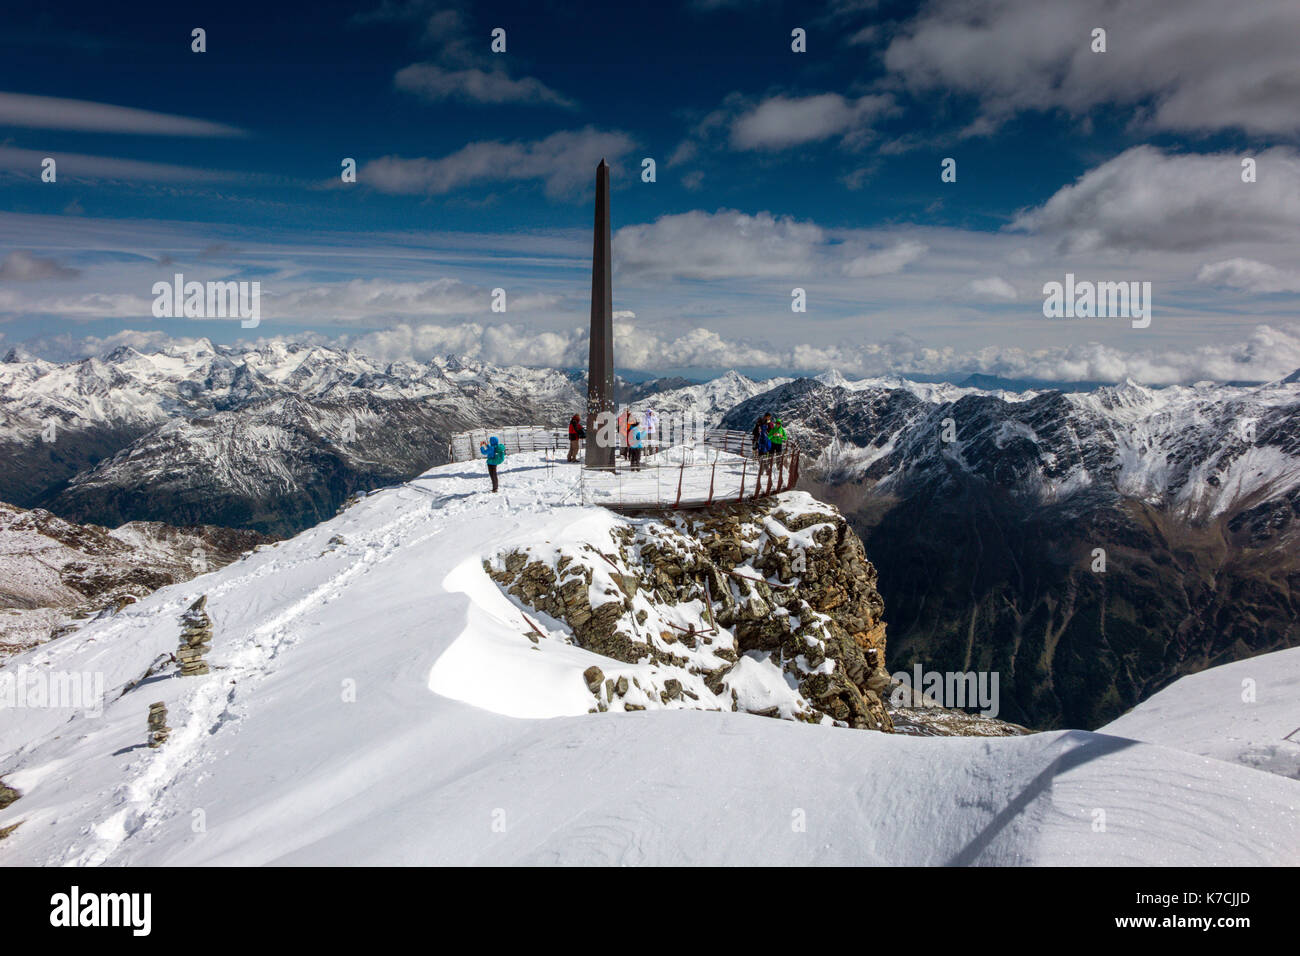 Hikers at snowy viewpoint, Schwarze Schneid cable car, Solden, Austria Stock Photo